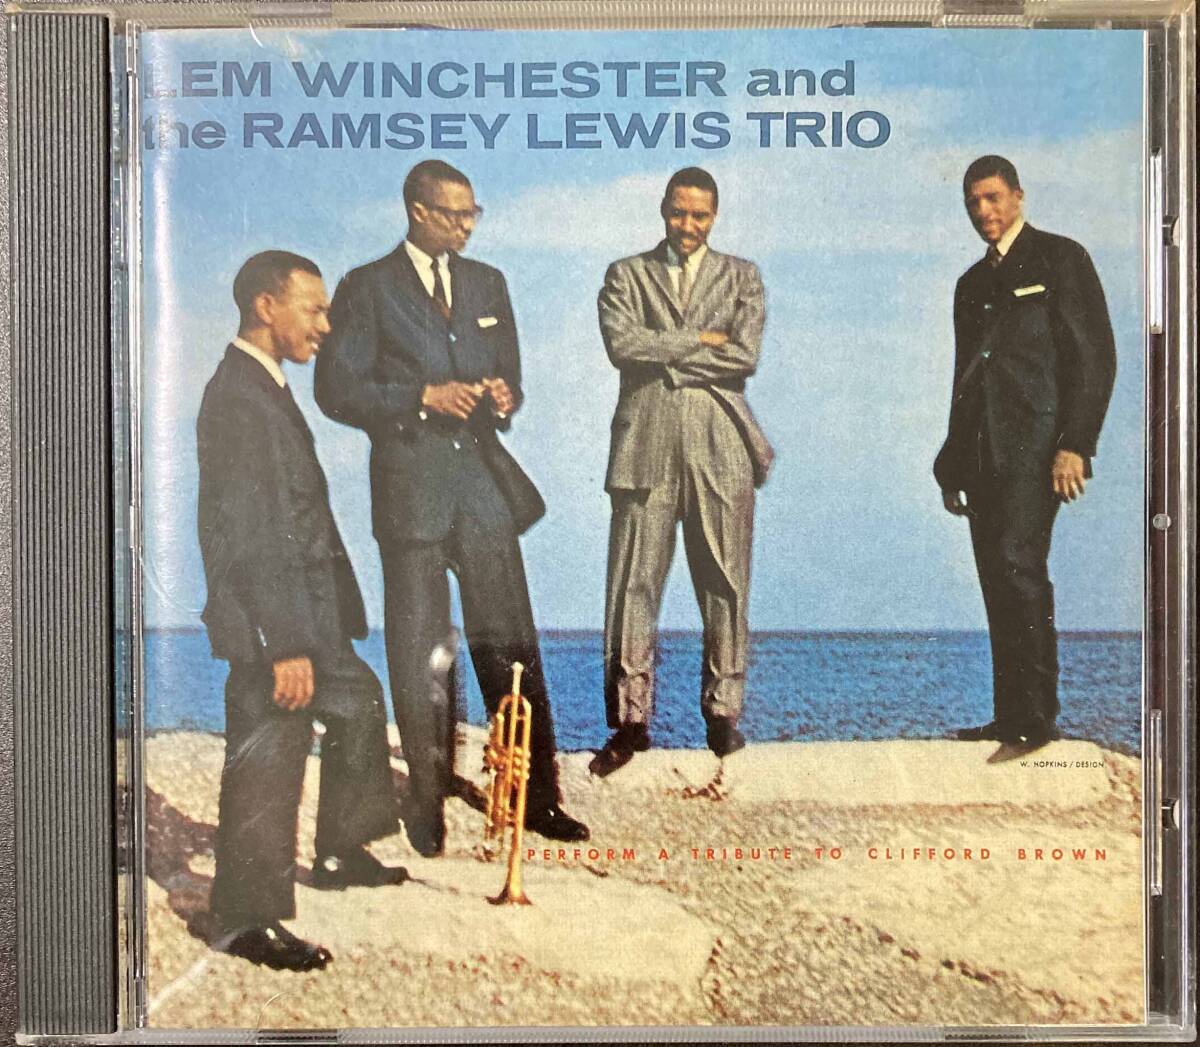 Lem Winchester & Ramsey Lewis / Perform a Tribute to Clifford Browan 中古CD 国内盤 帯付き 20bit Super Cording の画像2